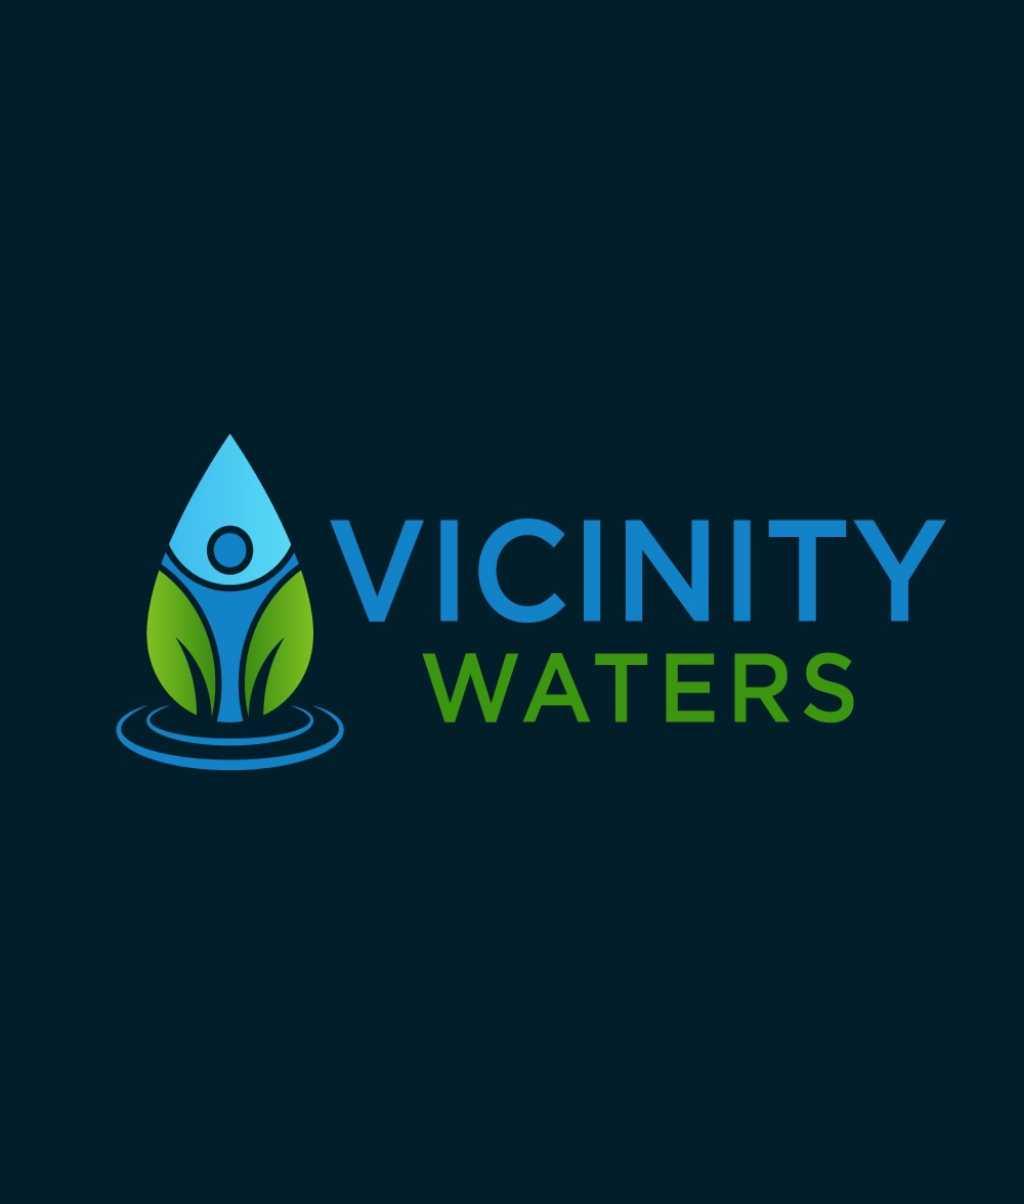 VICINITY WATERS